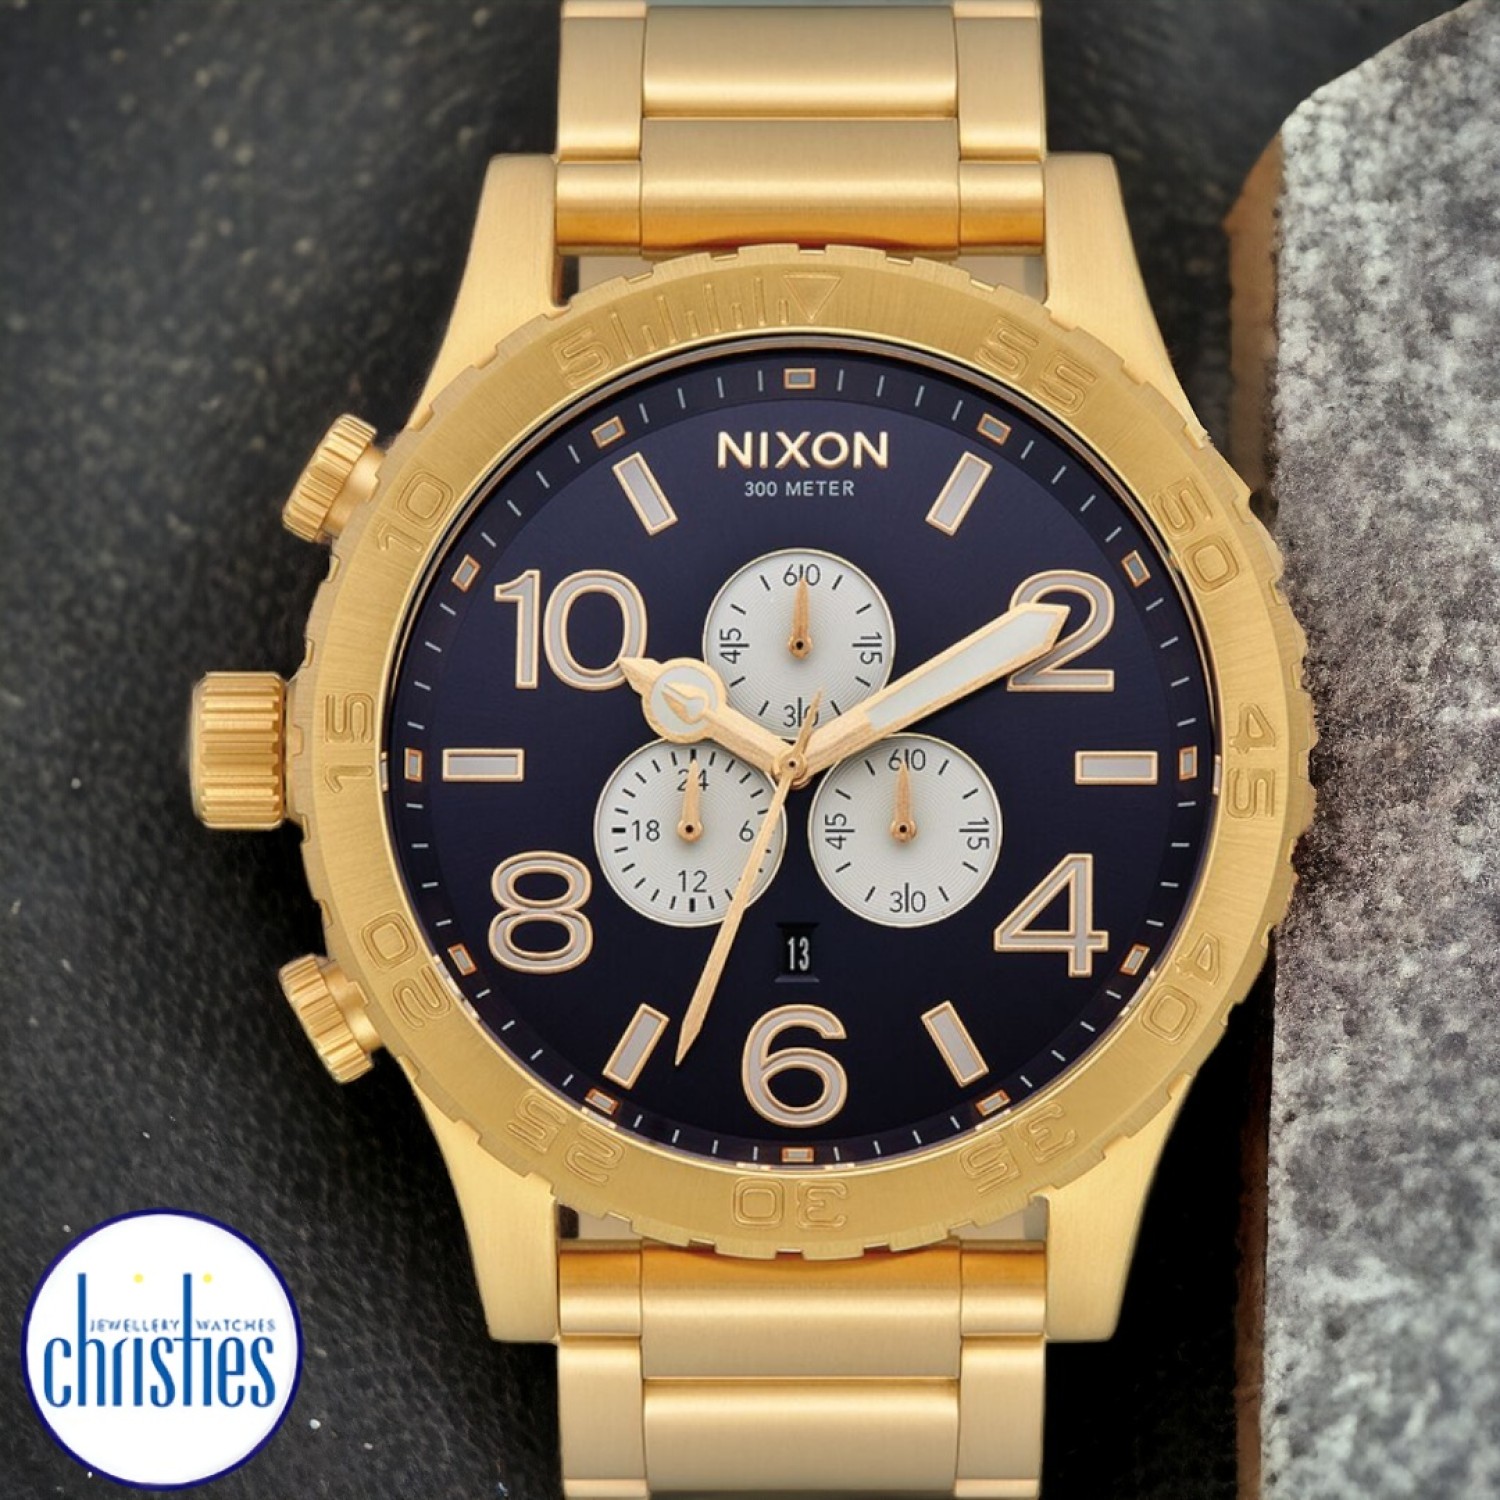 A083203300 NIXON 51-30 Chrono Watch A083-2033-00 NIXON Watches Auckland |Nixon watches are often chosen as gifts due to their stylish designs and functionality.